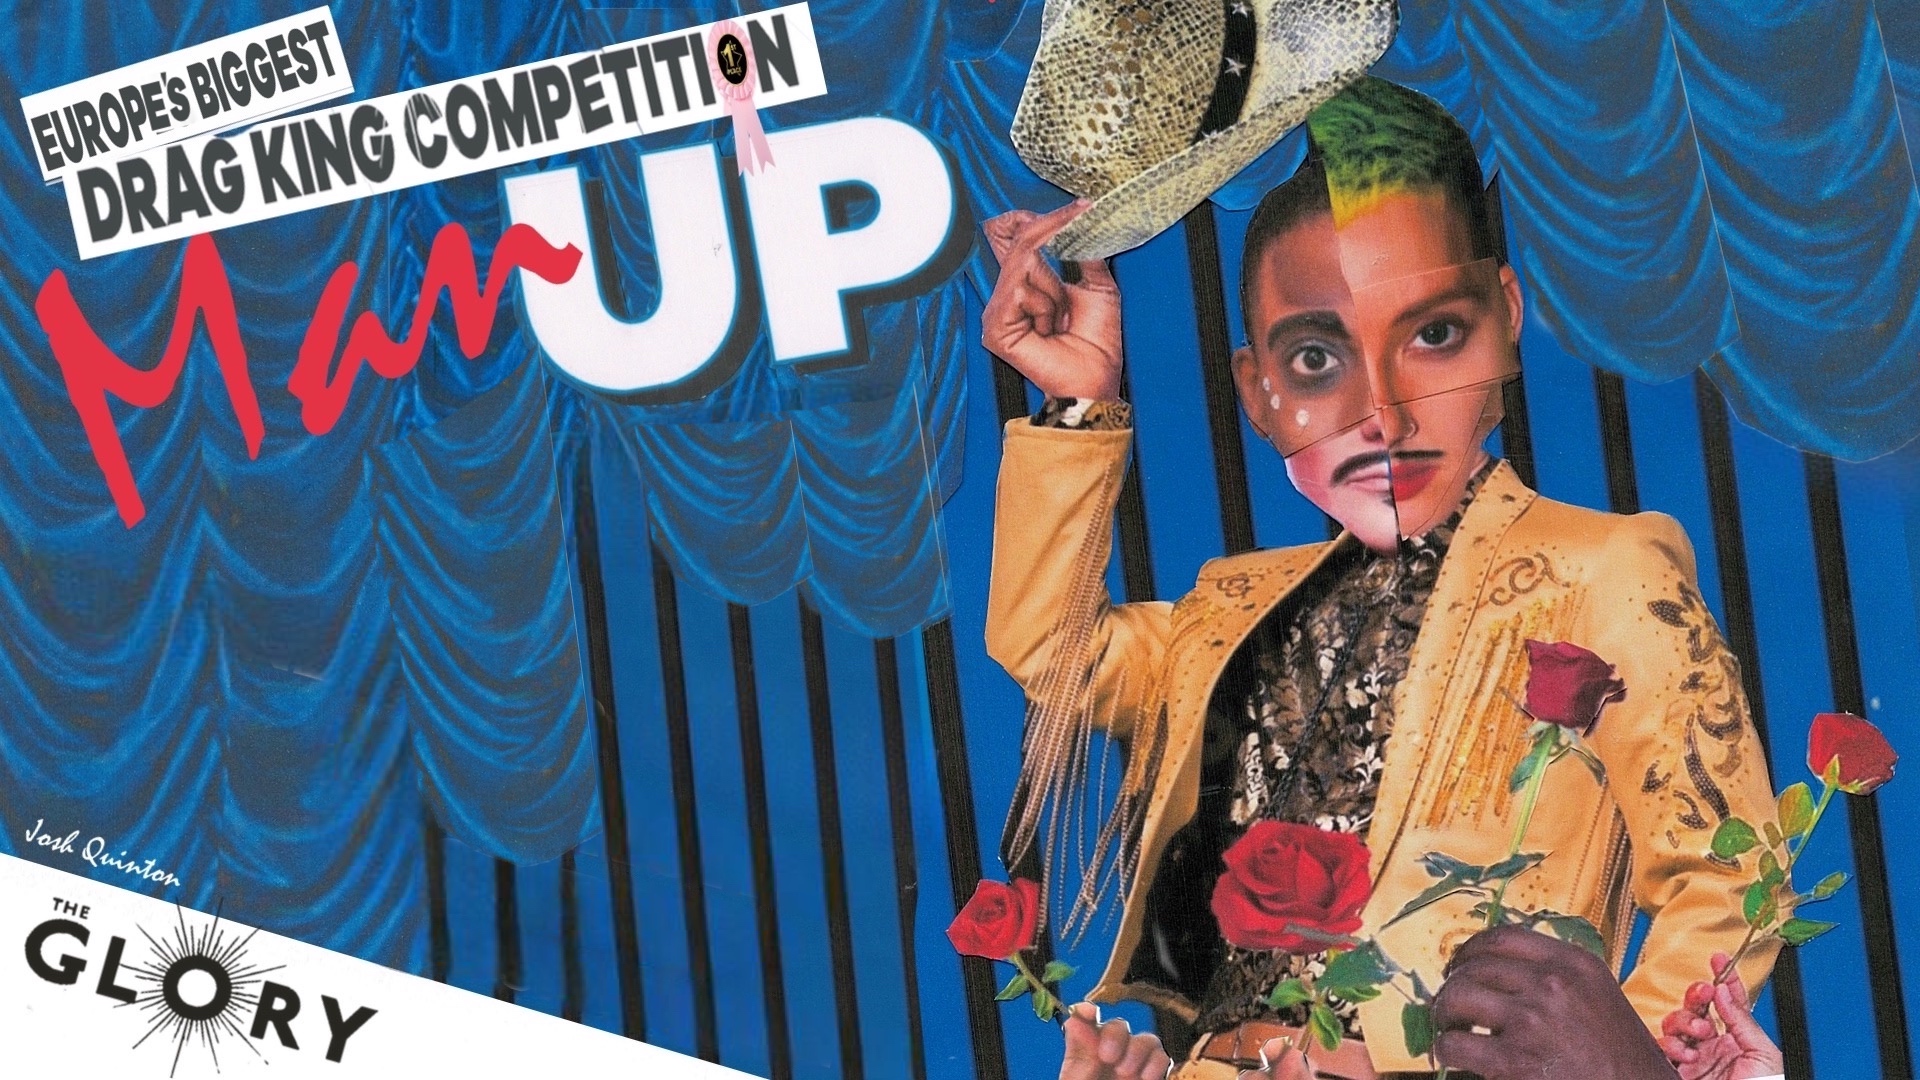 Man Up! Drag King Competition – HEAT 2